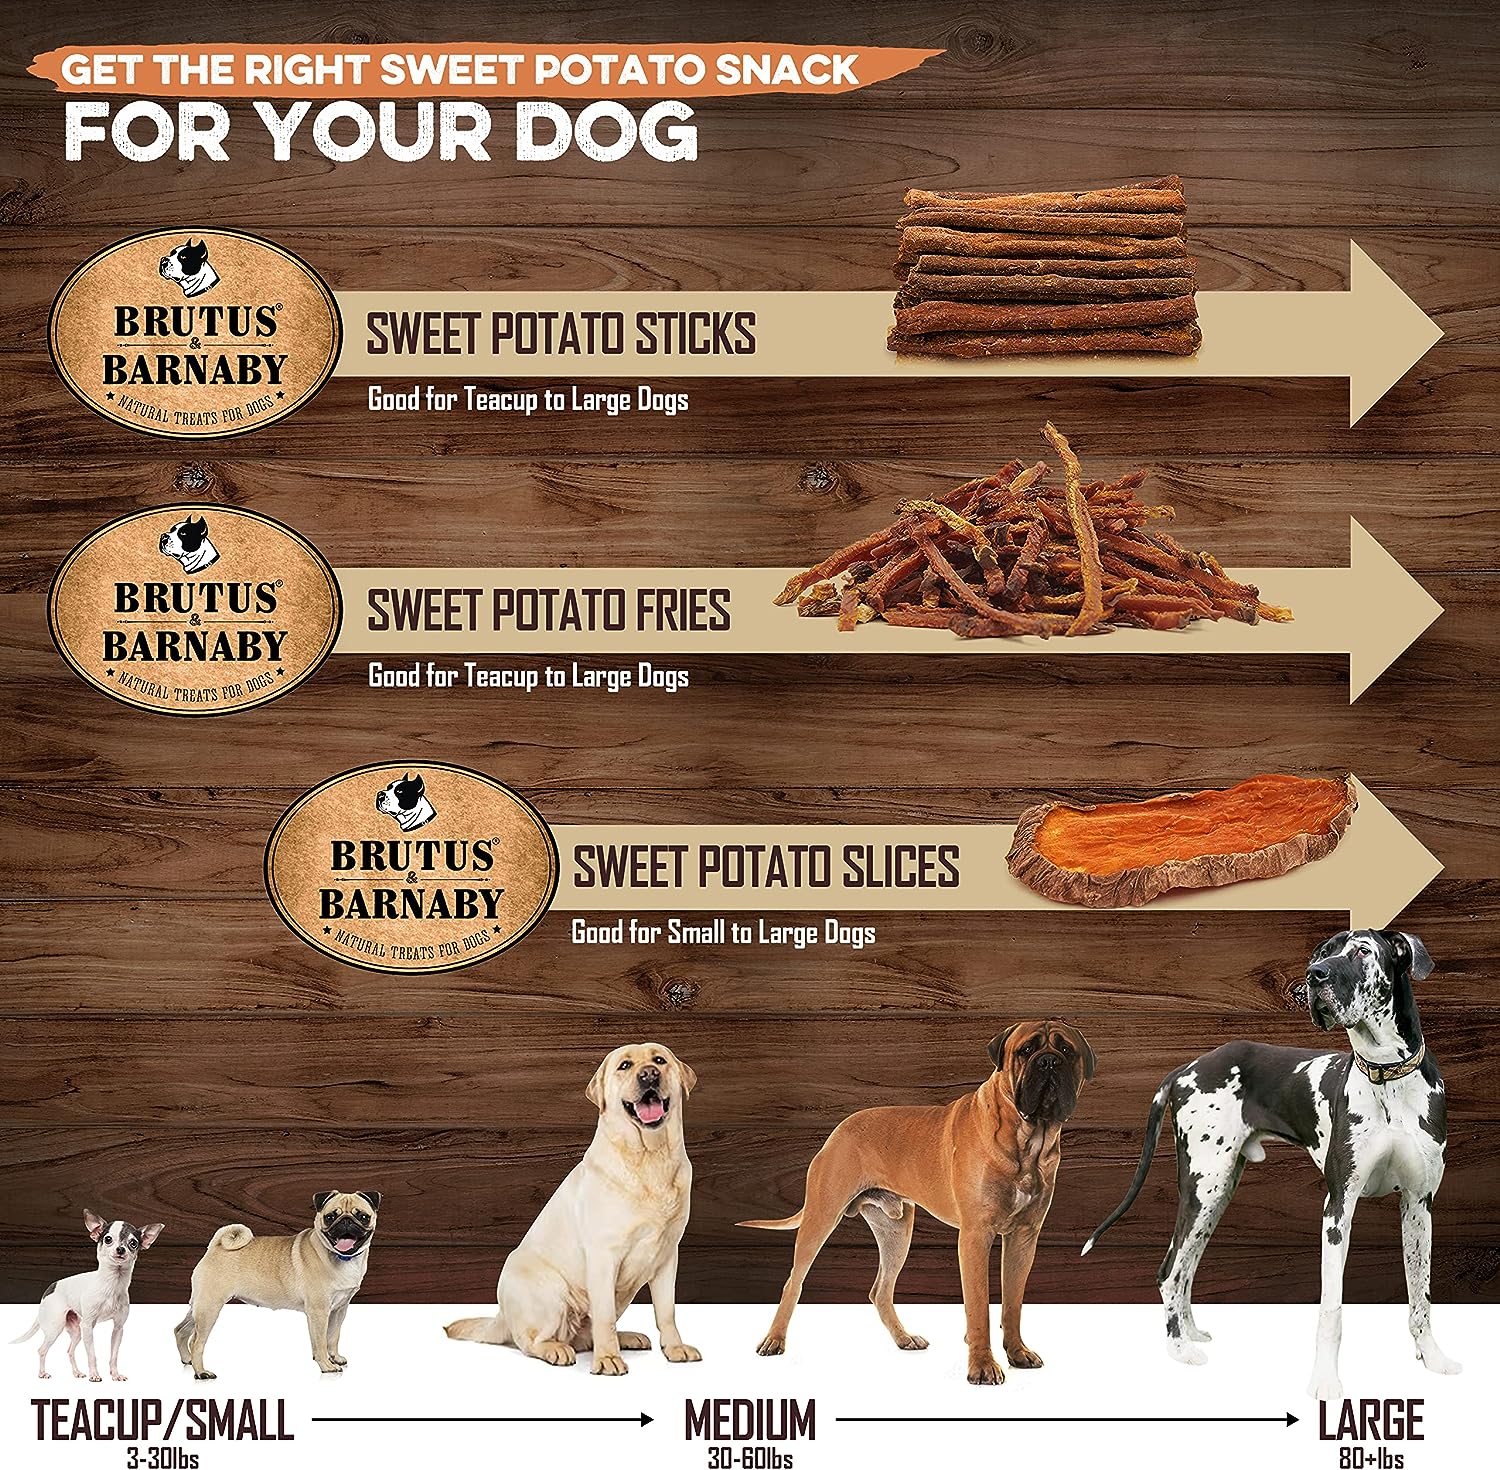 BRUTUS & BARNABY Sweet Potato Dog Treats- No Additive Dehydrated Sweet Potato Fries, Grain Free, Gluten Free and No Preservatives Added (5lb) : Pet Supplies